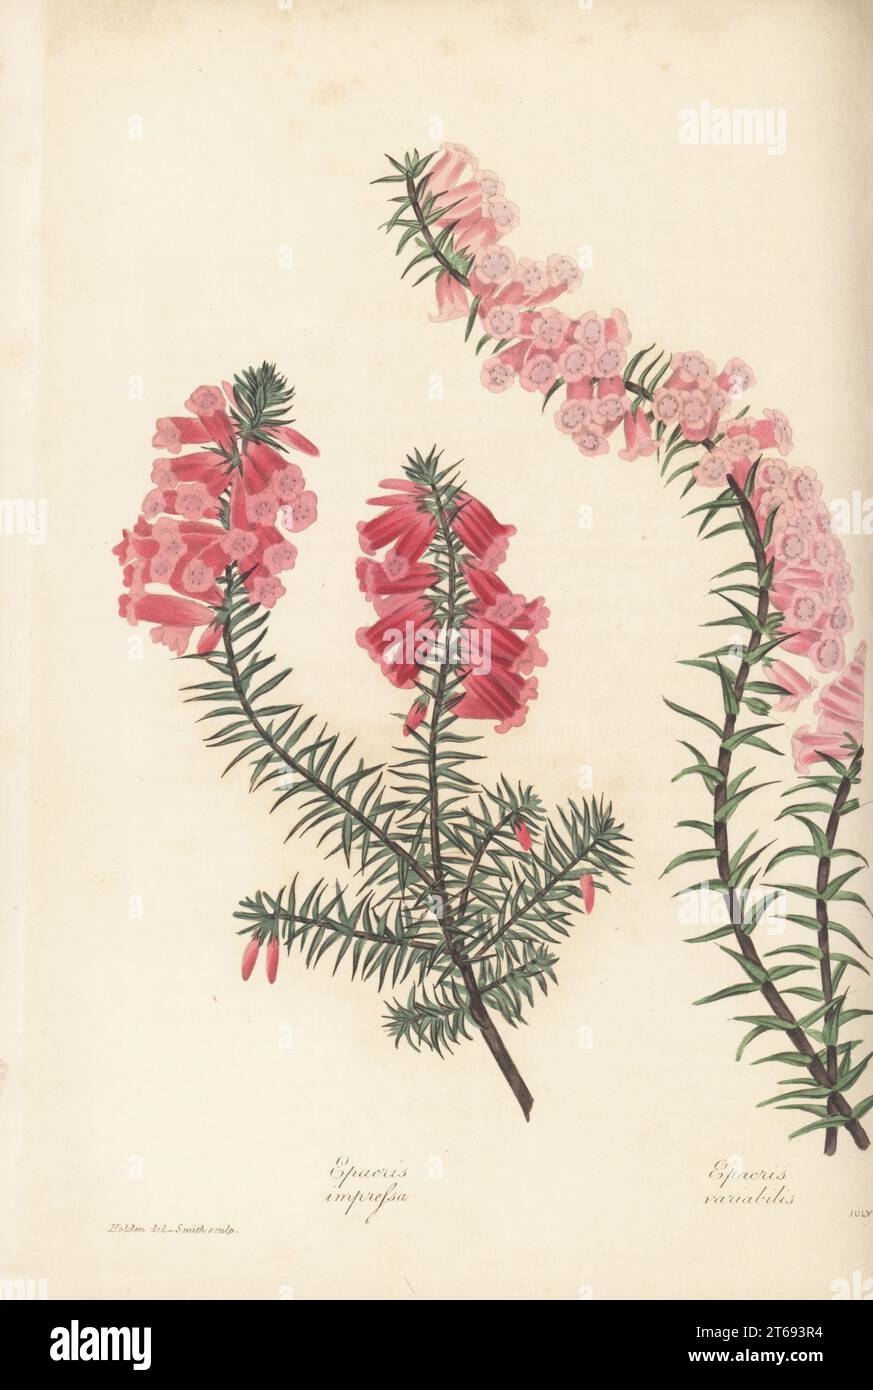 Common heath, Epacris impressa. Native to Victoria, South Australia, New South Wales, Van Diemen's Land (Tasmania), Australia, introduced by nurserymen Messrs. Mackey (Lowe), Clapton, 1825. Epacris impressa and variable epacris, Epacris variabilis. Handcoloured engraving by Frederick William Smith after a botanical illustration by Samuel Holden from Joseph Paxtons Magazine of Botany, and Register of Flowering Plants, Volume 4, Orr and Smith, London, 1837. Stock Photo